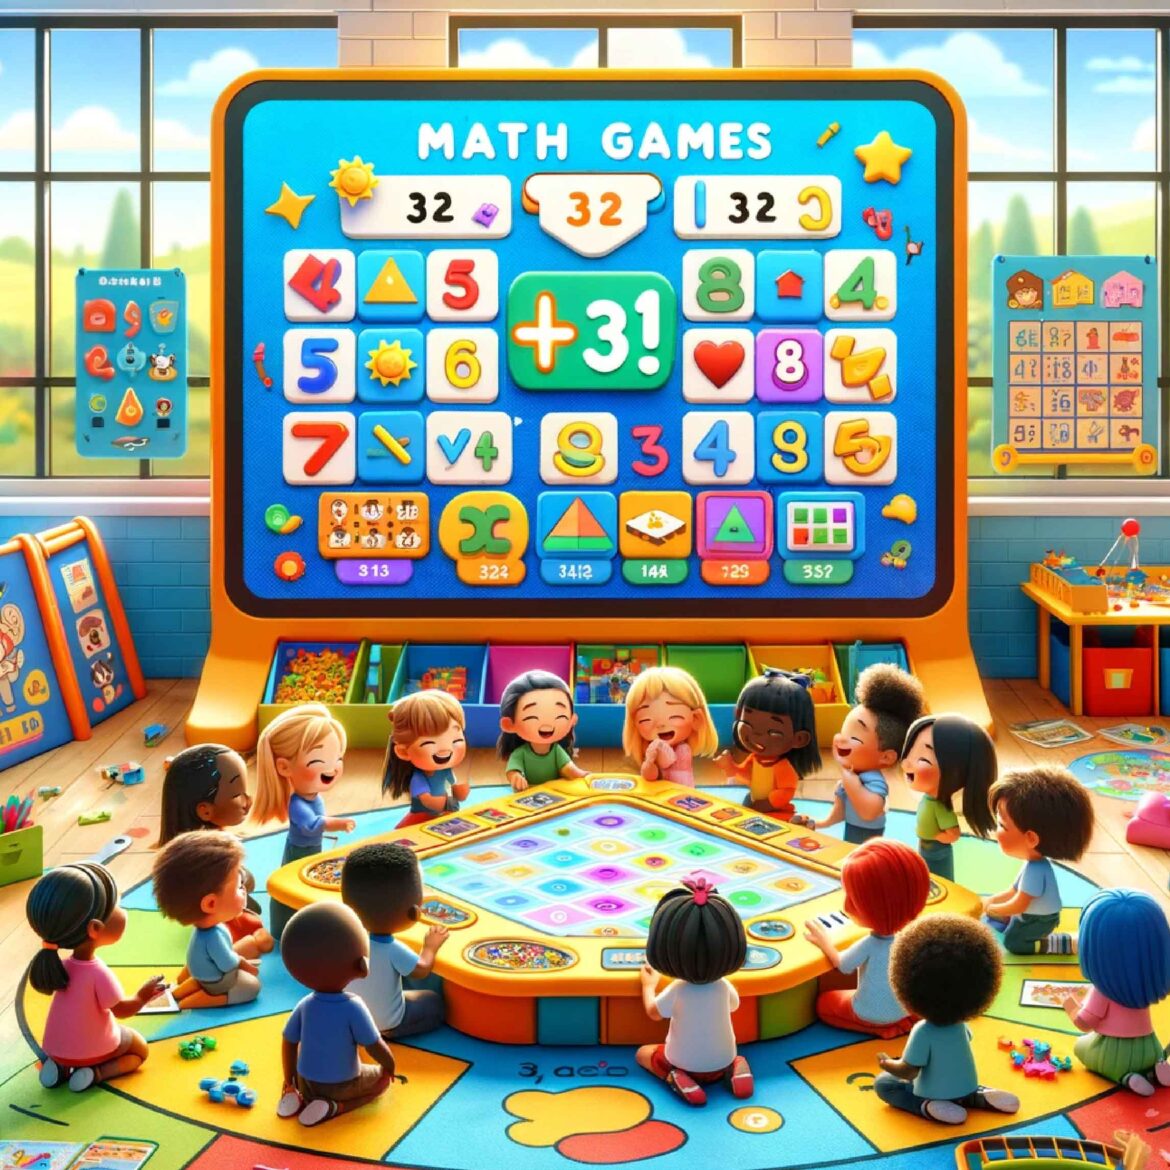 7 Cool Reasons Why Cool Math Games are Your Best Bet for Educational Fun